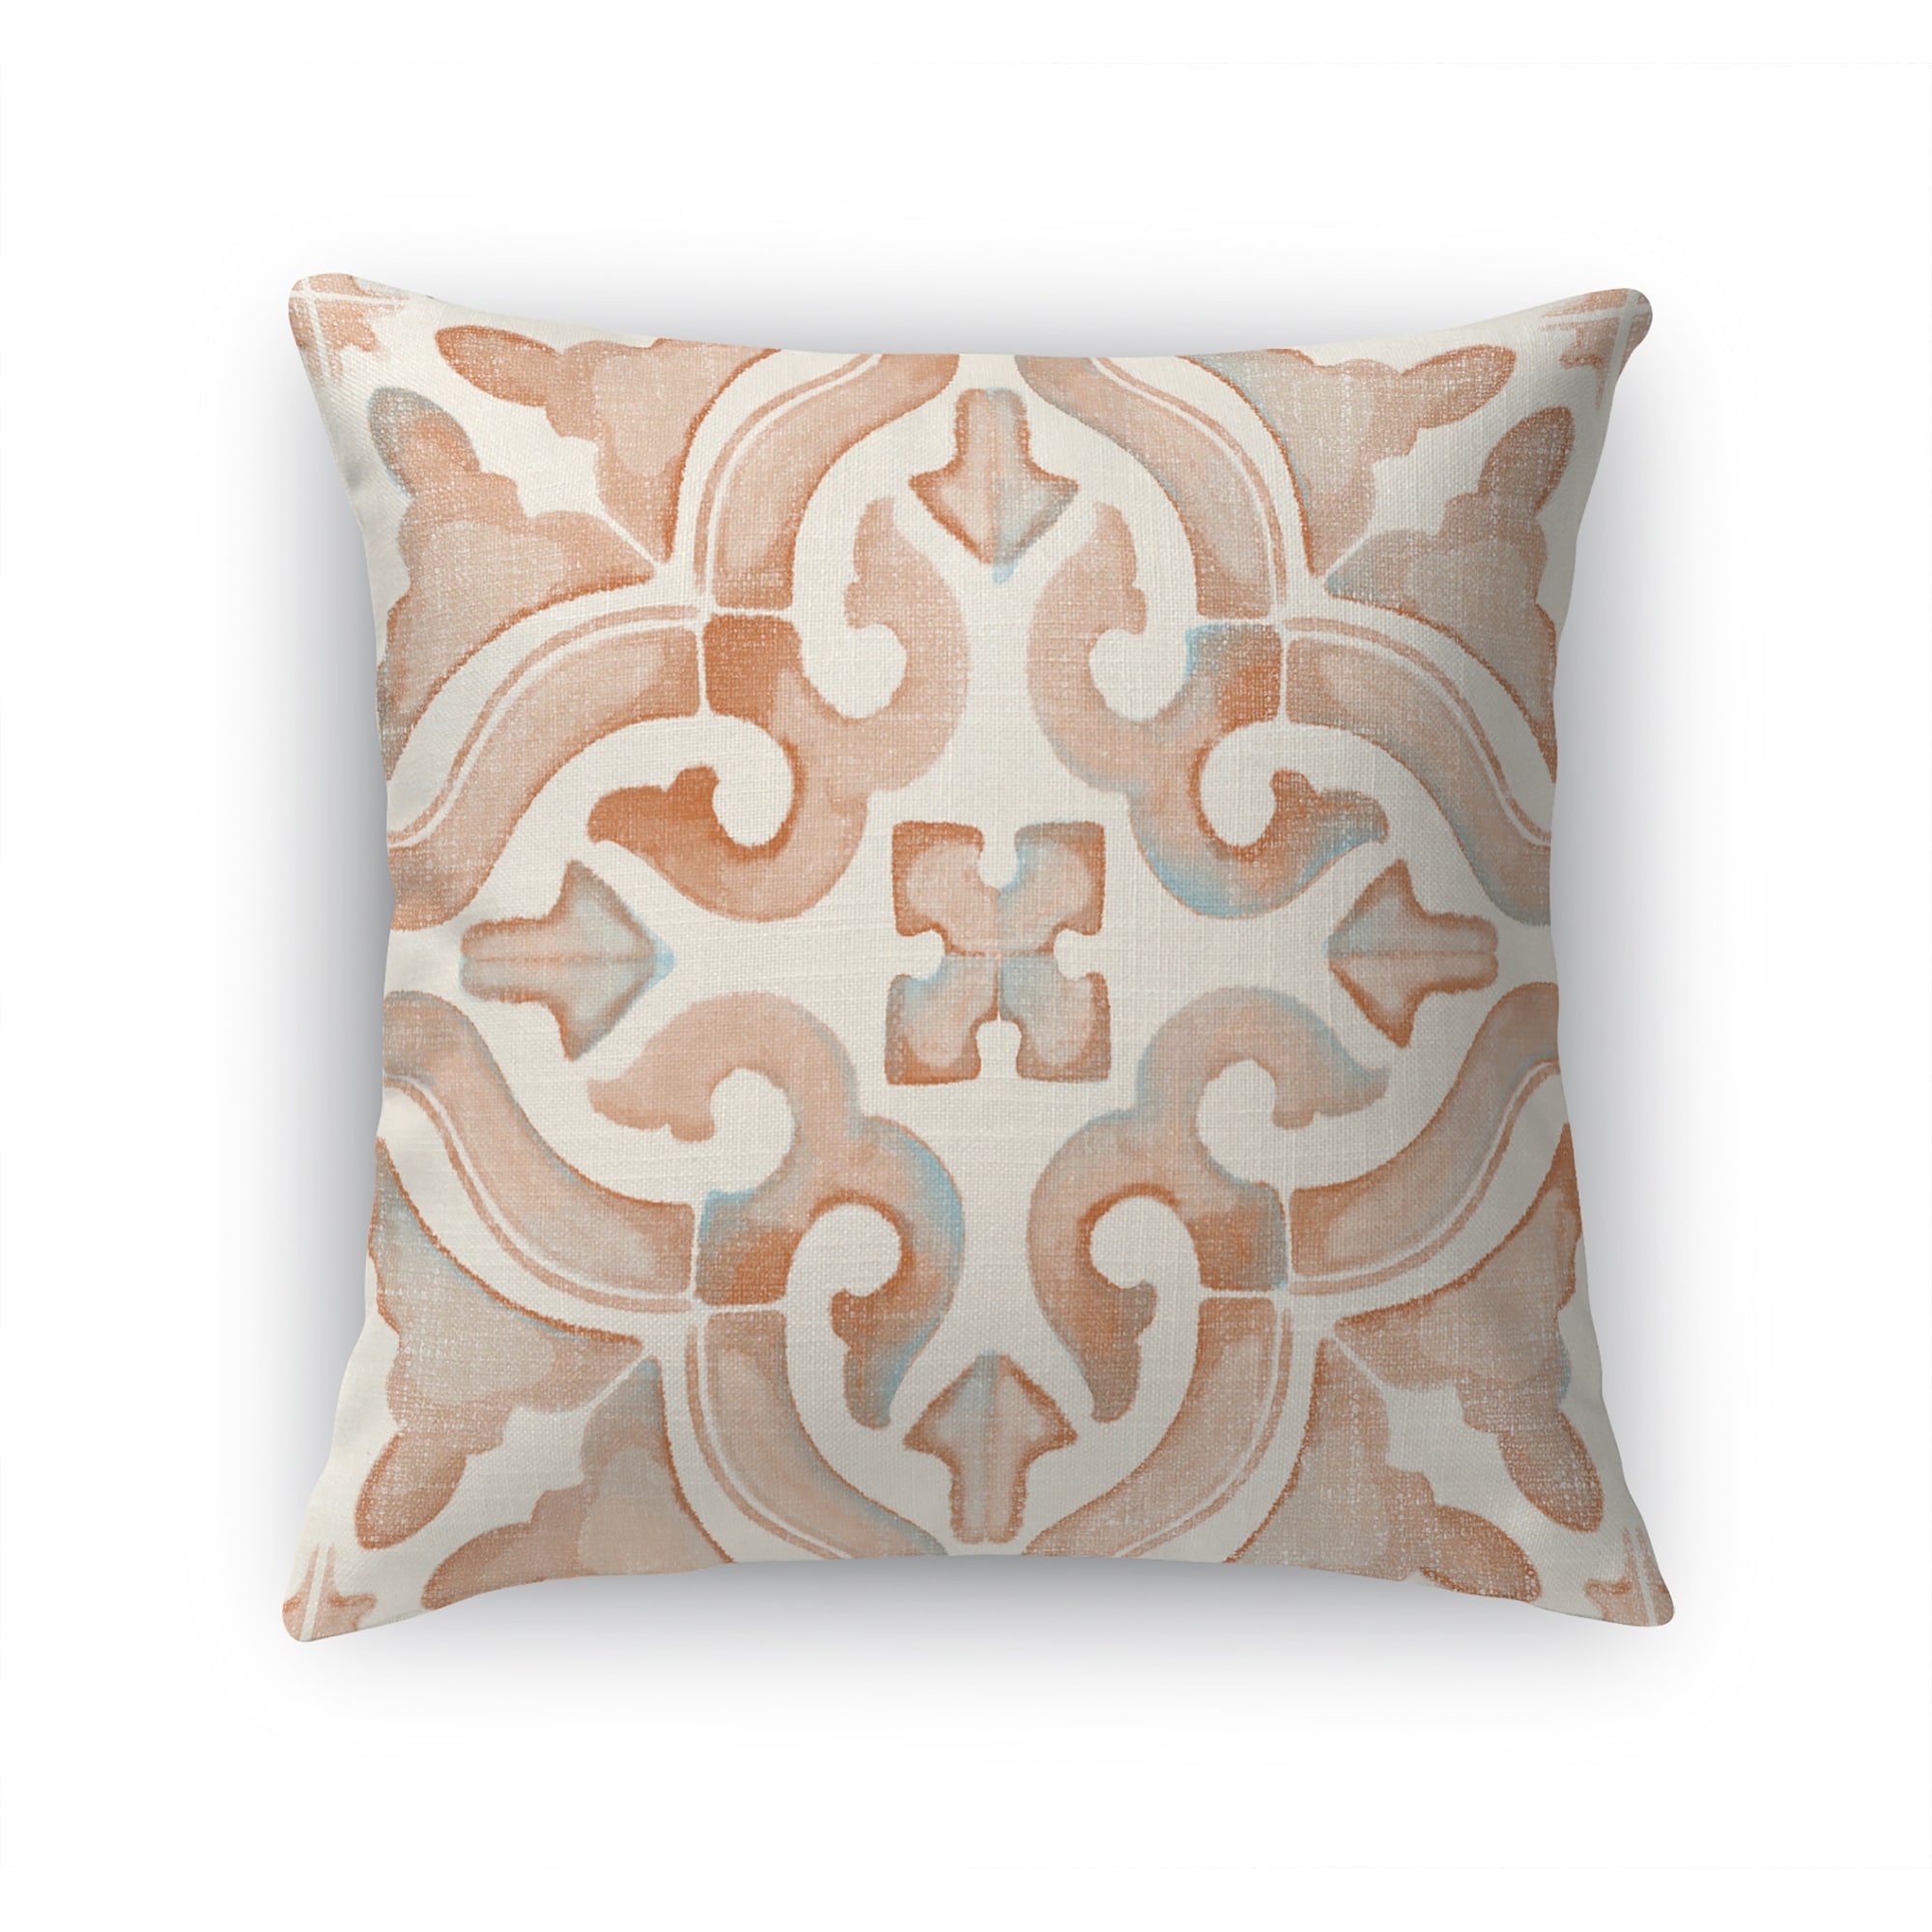 https://ak1.ostkcdn.com/images/products/is/images/direct/8af69ead8c1354bb284849b66fc2666c8426f861/WATERCOLOR-TILES-TERRACOTTA-Accent-Pillow-By-Kavka-Designs.jpg